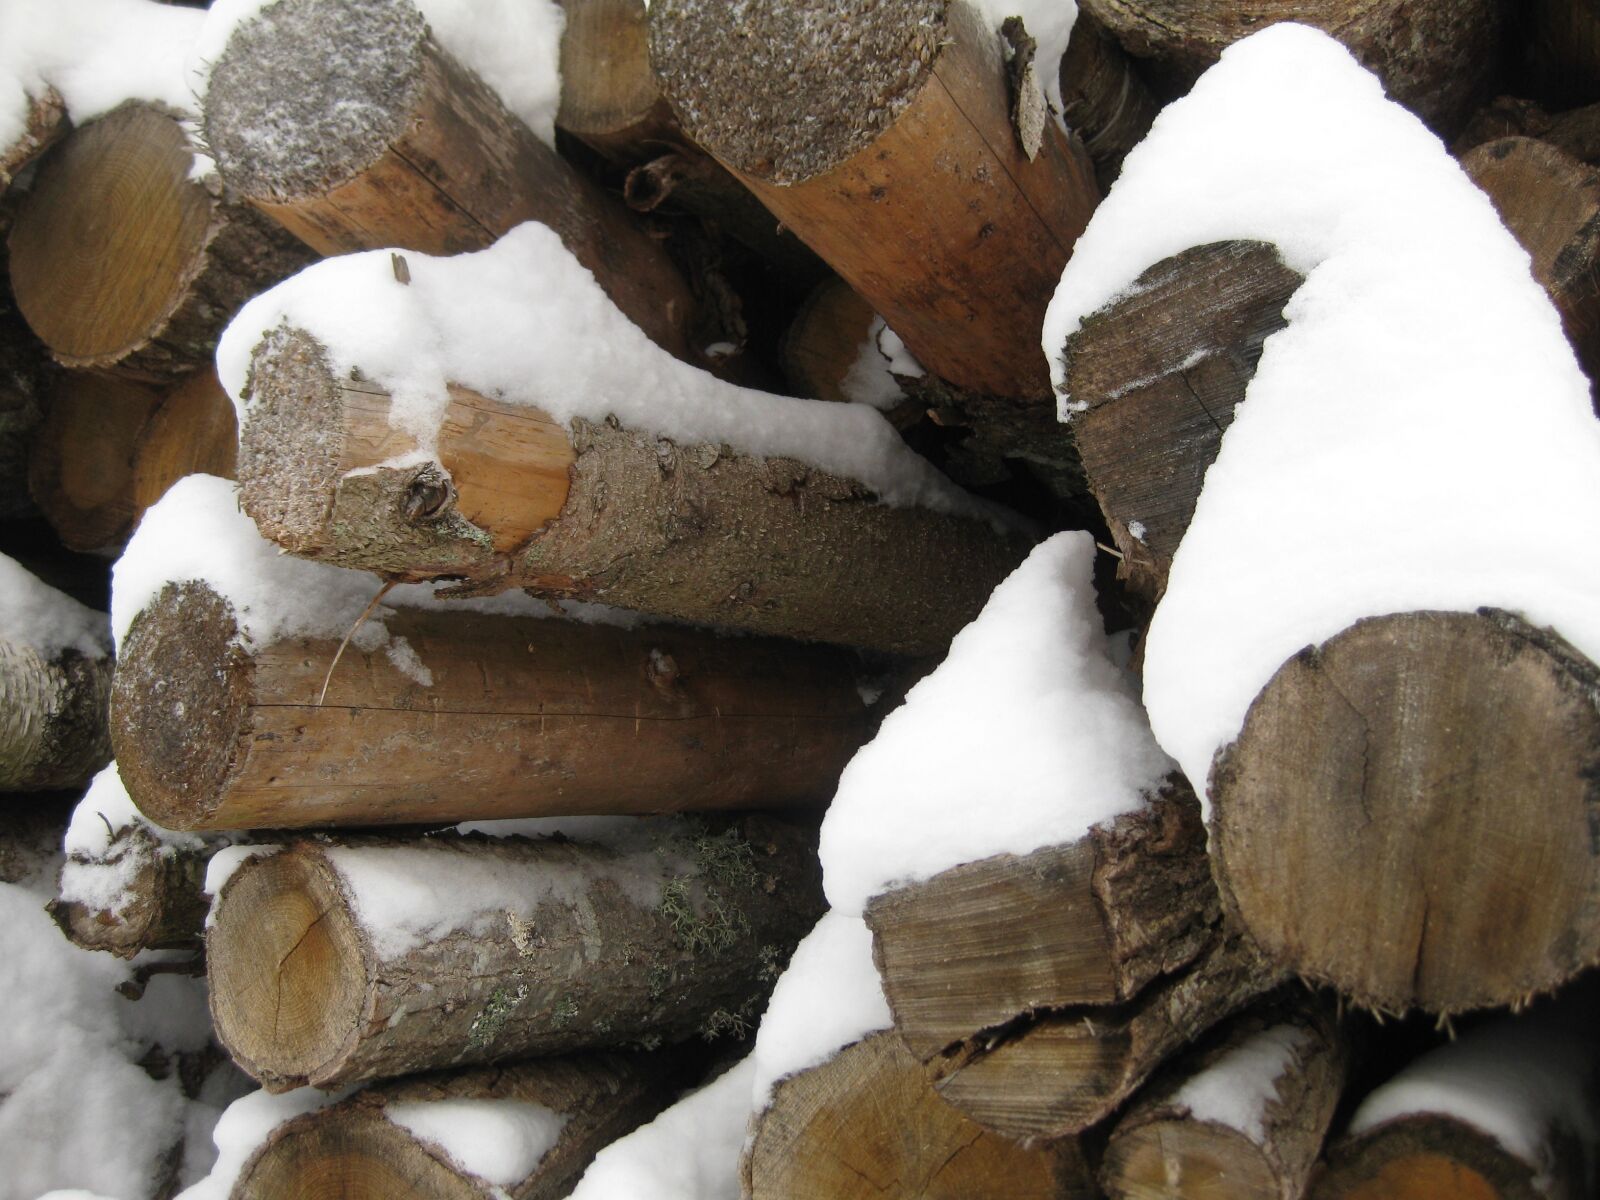 Canon PowerShot SD1100 IS (Digital IXUS 80 IS / IXY Digital 20 IS) sample photo. Wood, logs, close up photography